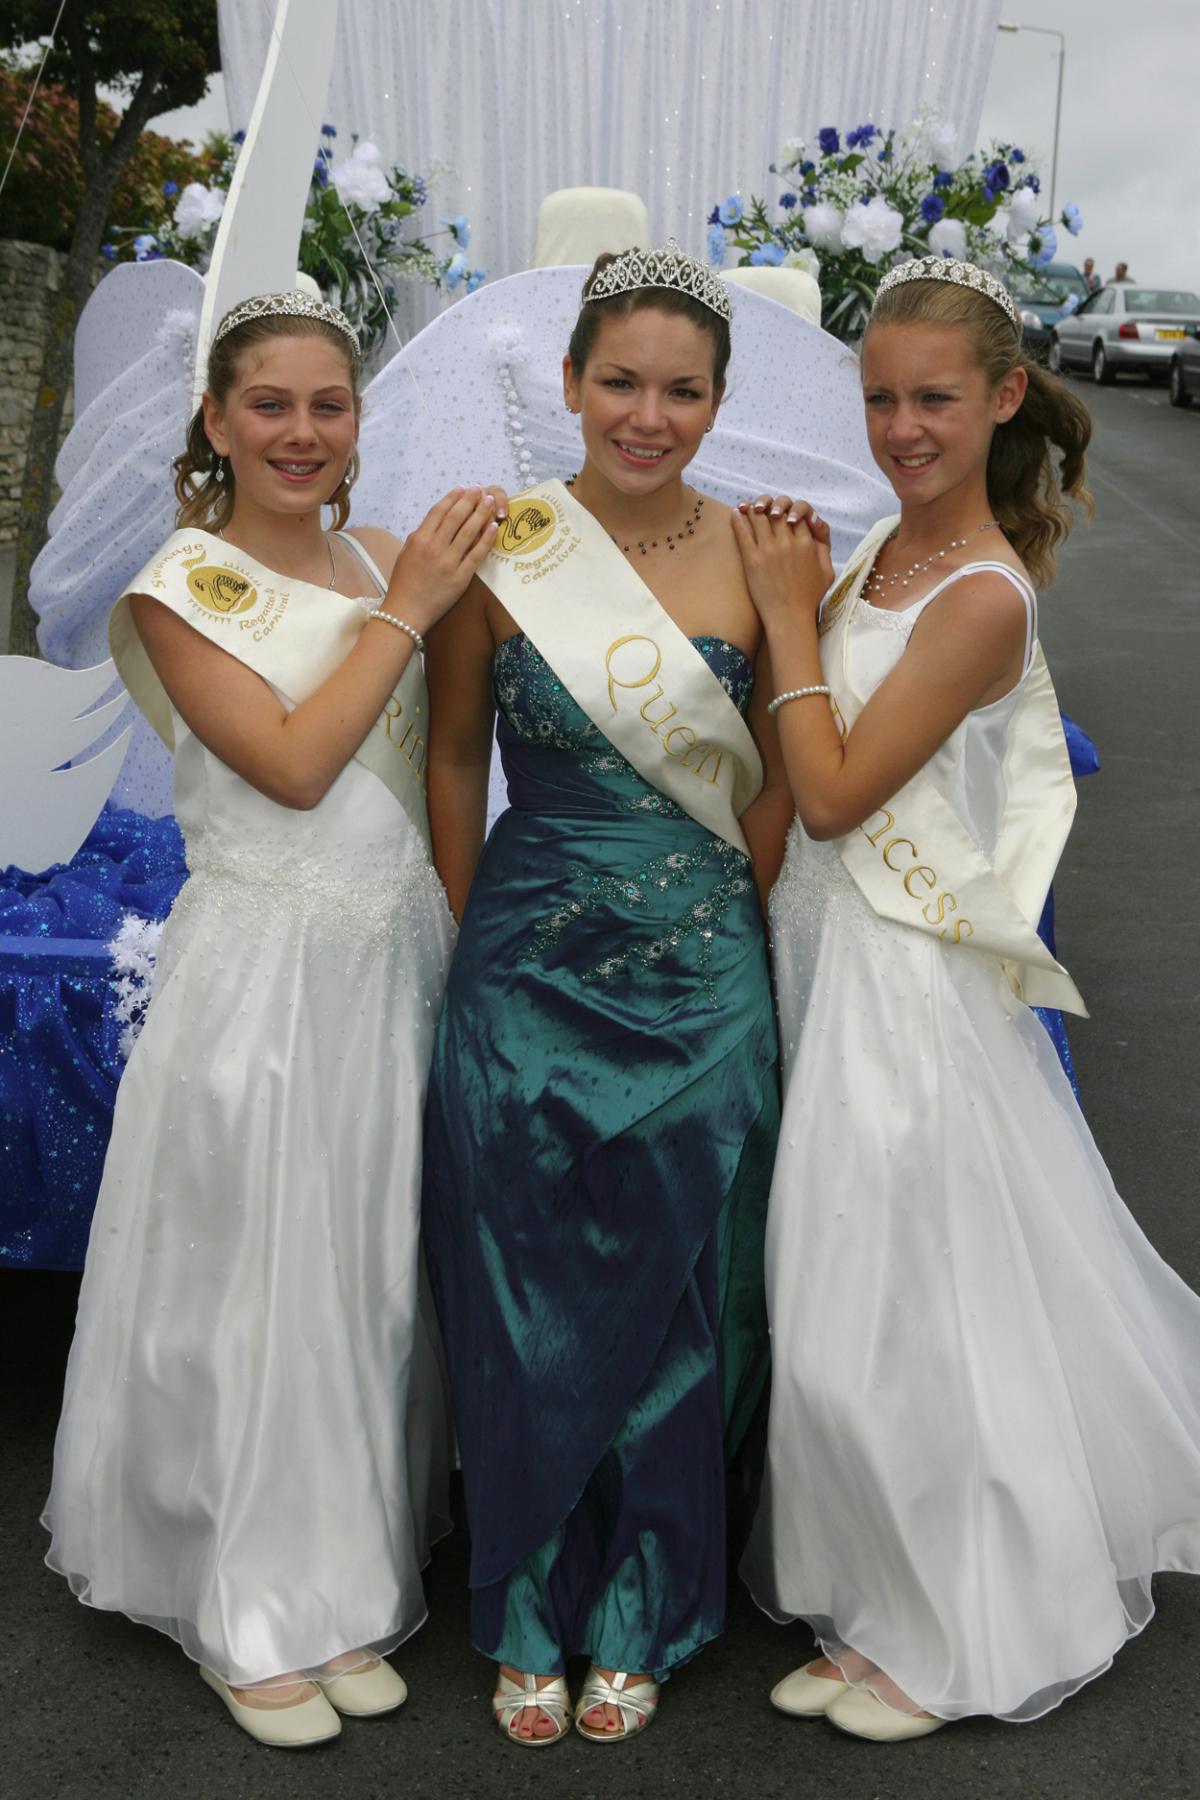 Swanage Carnival Queen and Princesses in 2010